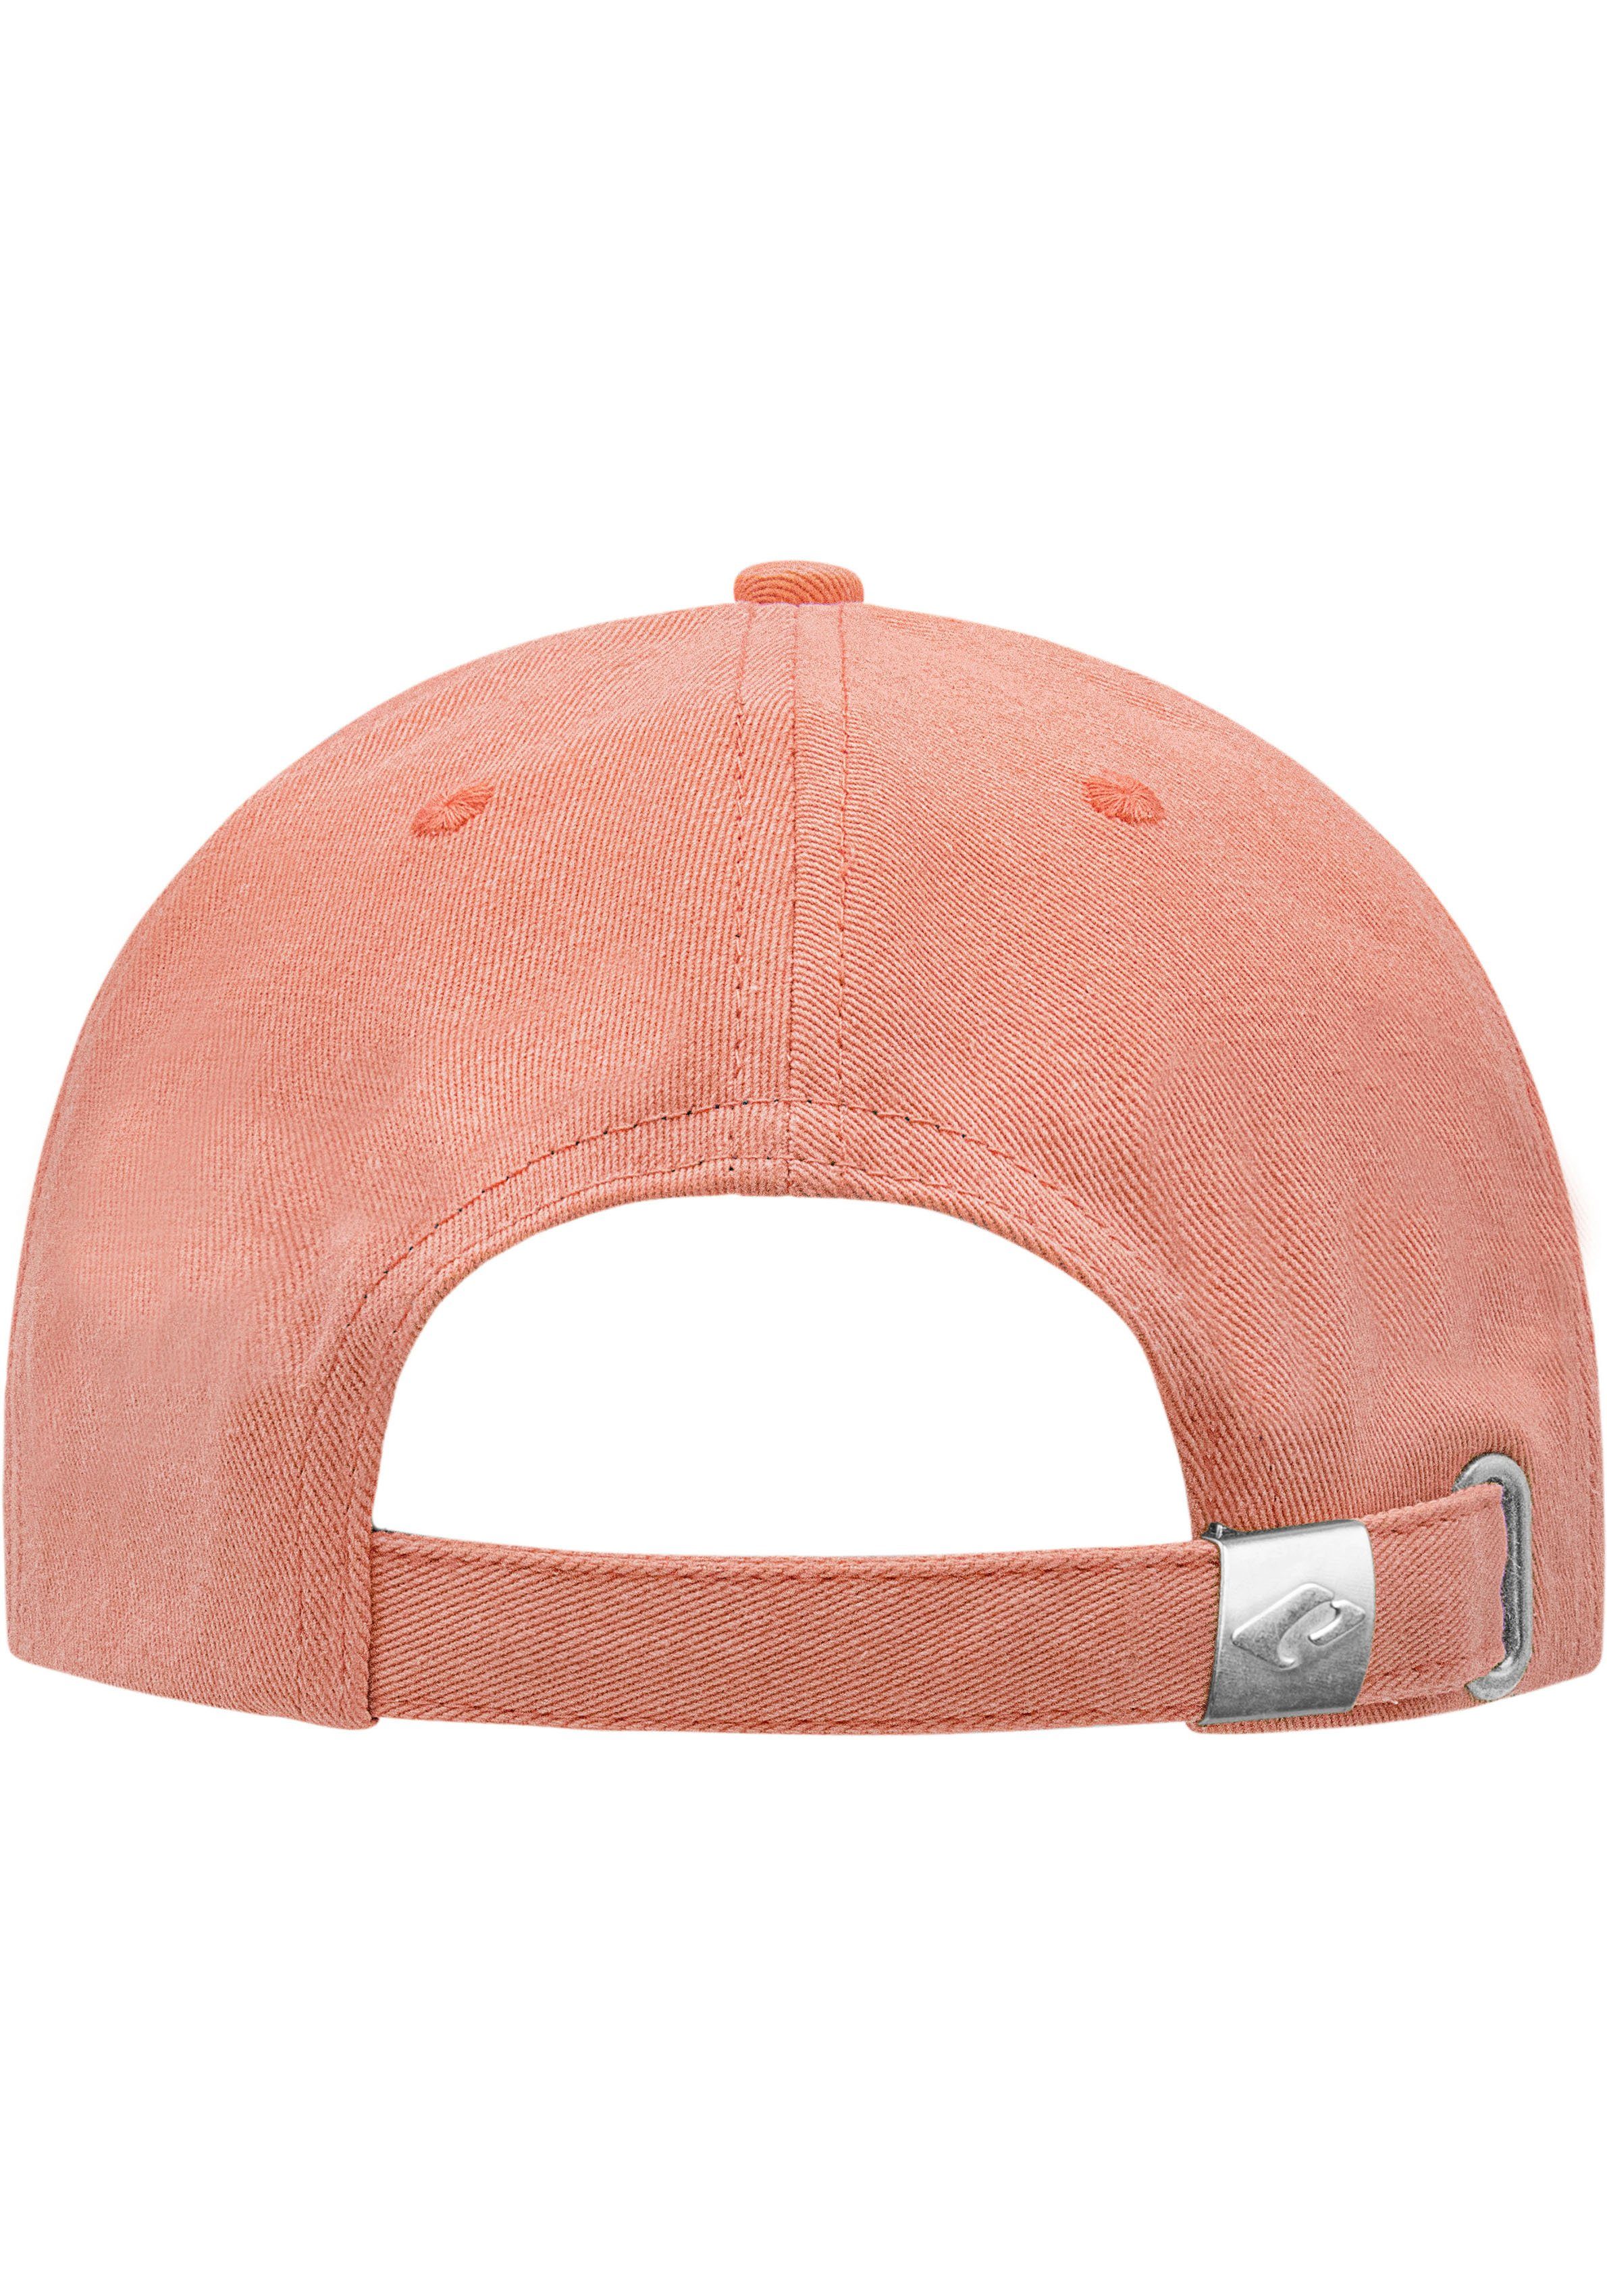 coral chillouts Baseball Hat Cap Arklow